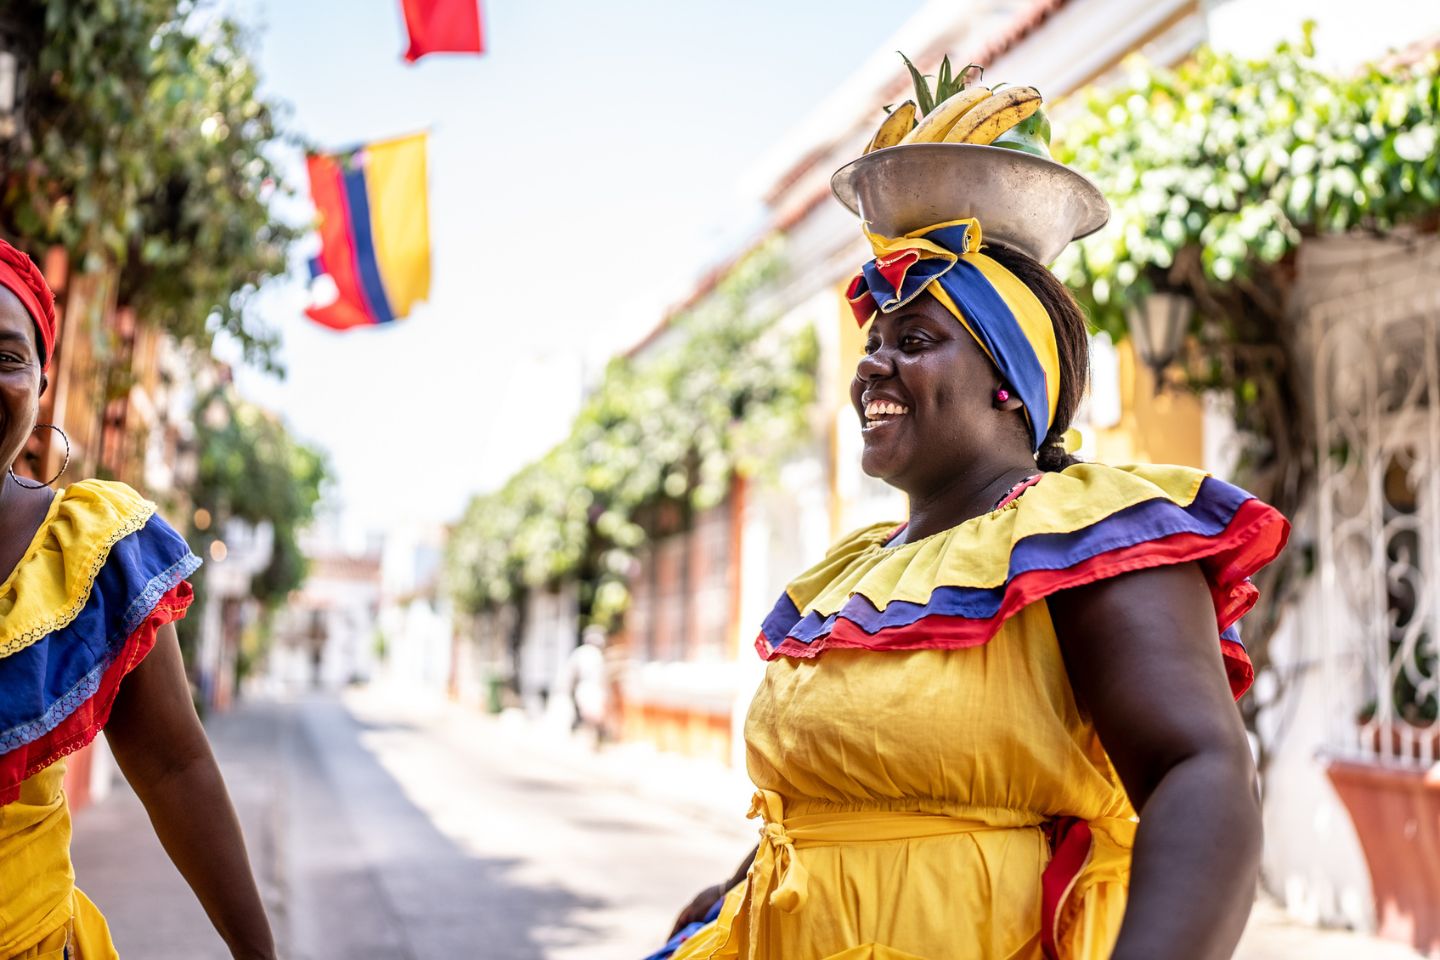 Palenquera woman in Colombia